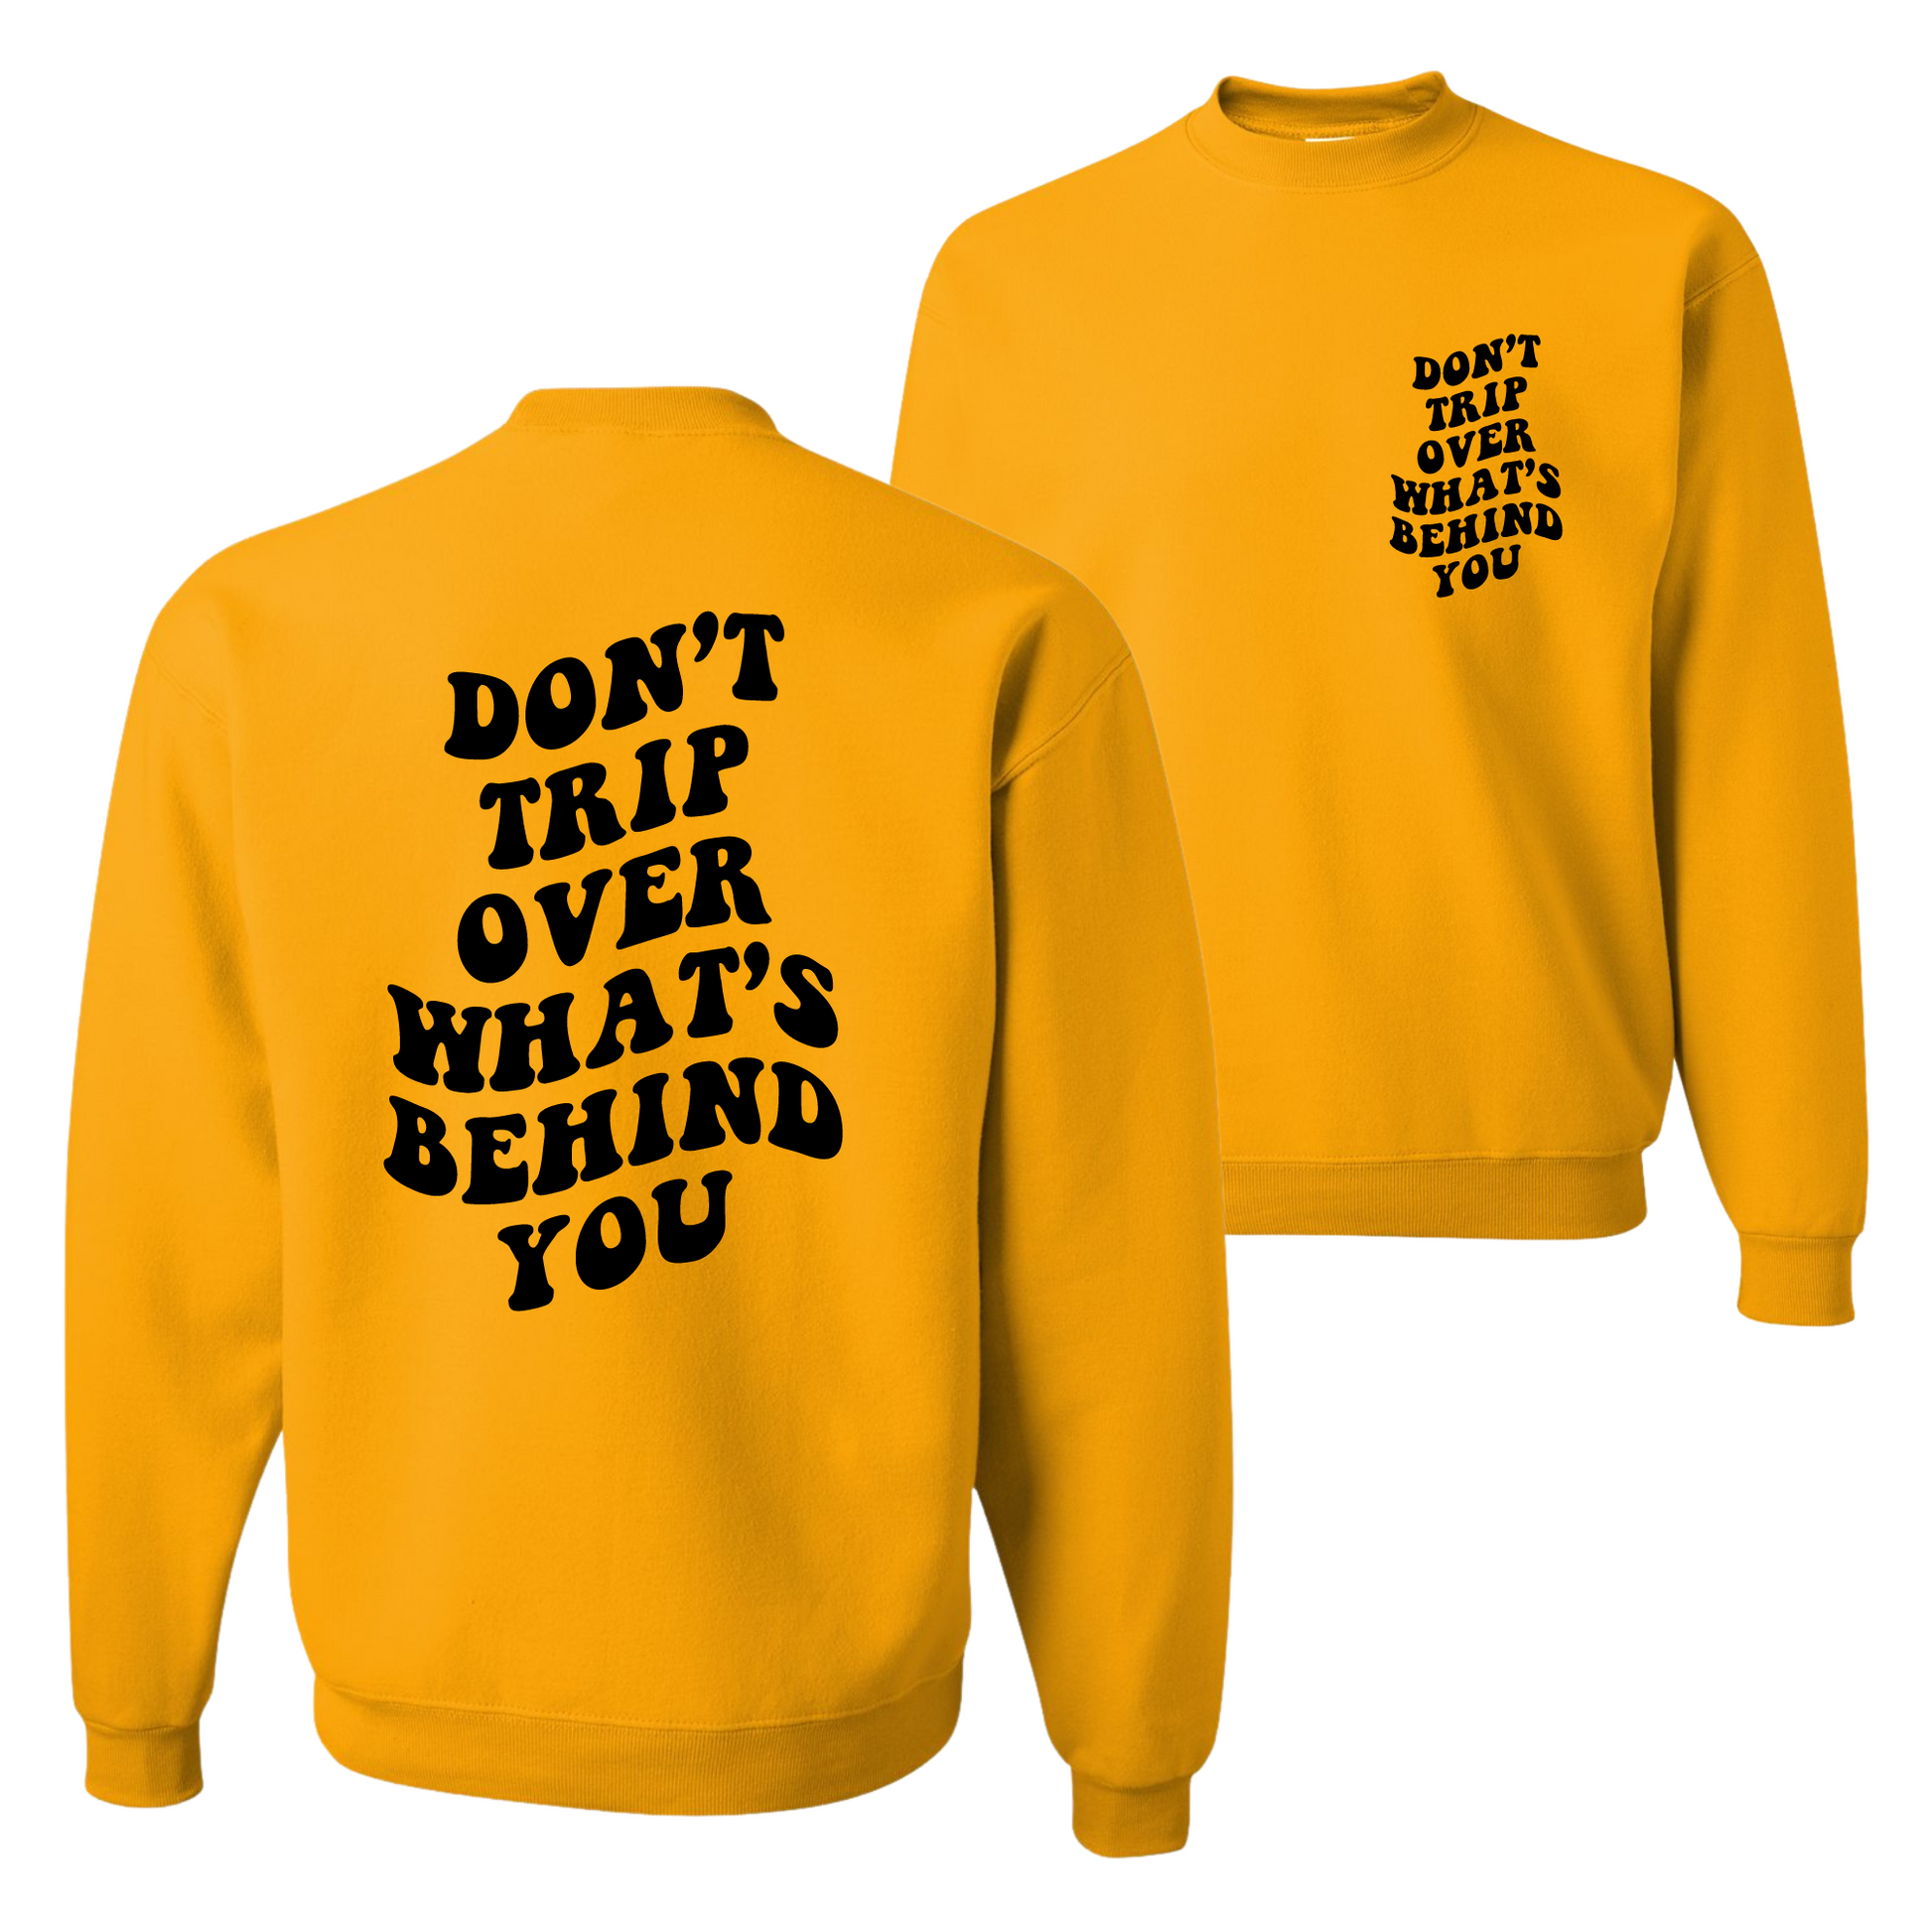 Resiliently Bold Don't Trip Over What's Behind You Golden Yellow Unisex Crewneck Sweatshirt